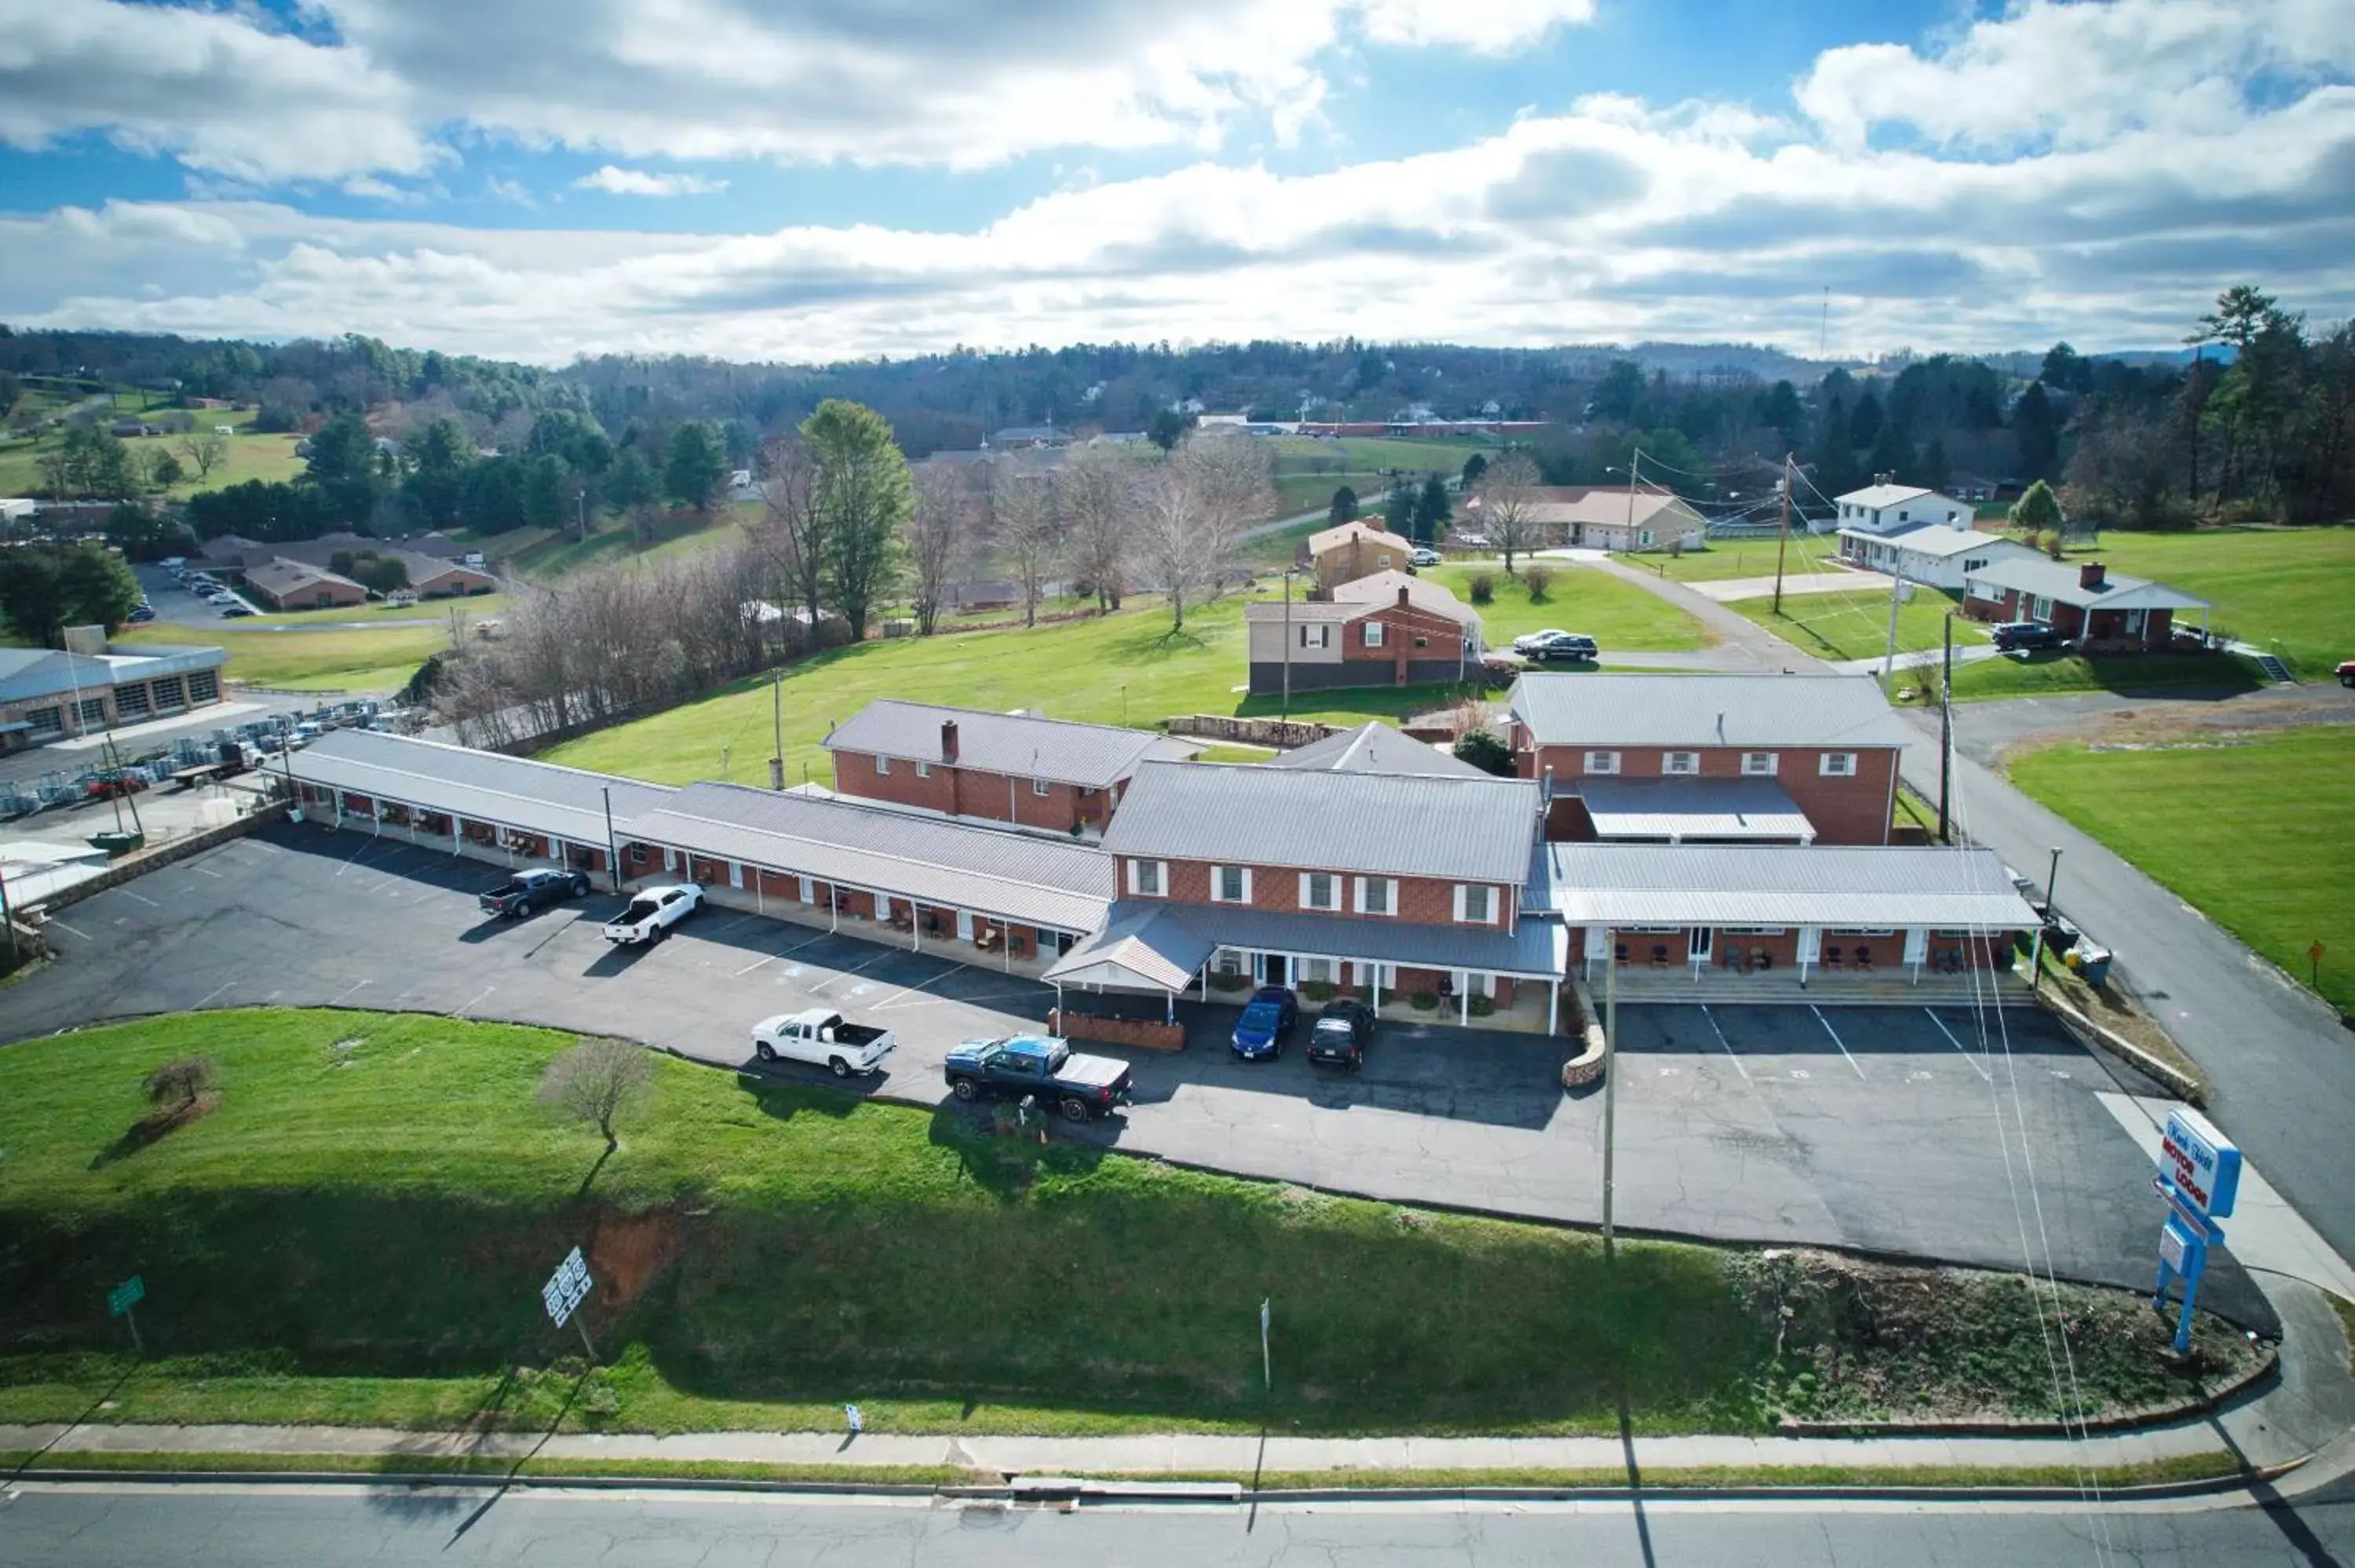 Property building, Bird's-eye View in Knob Hill Motor Lodge